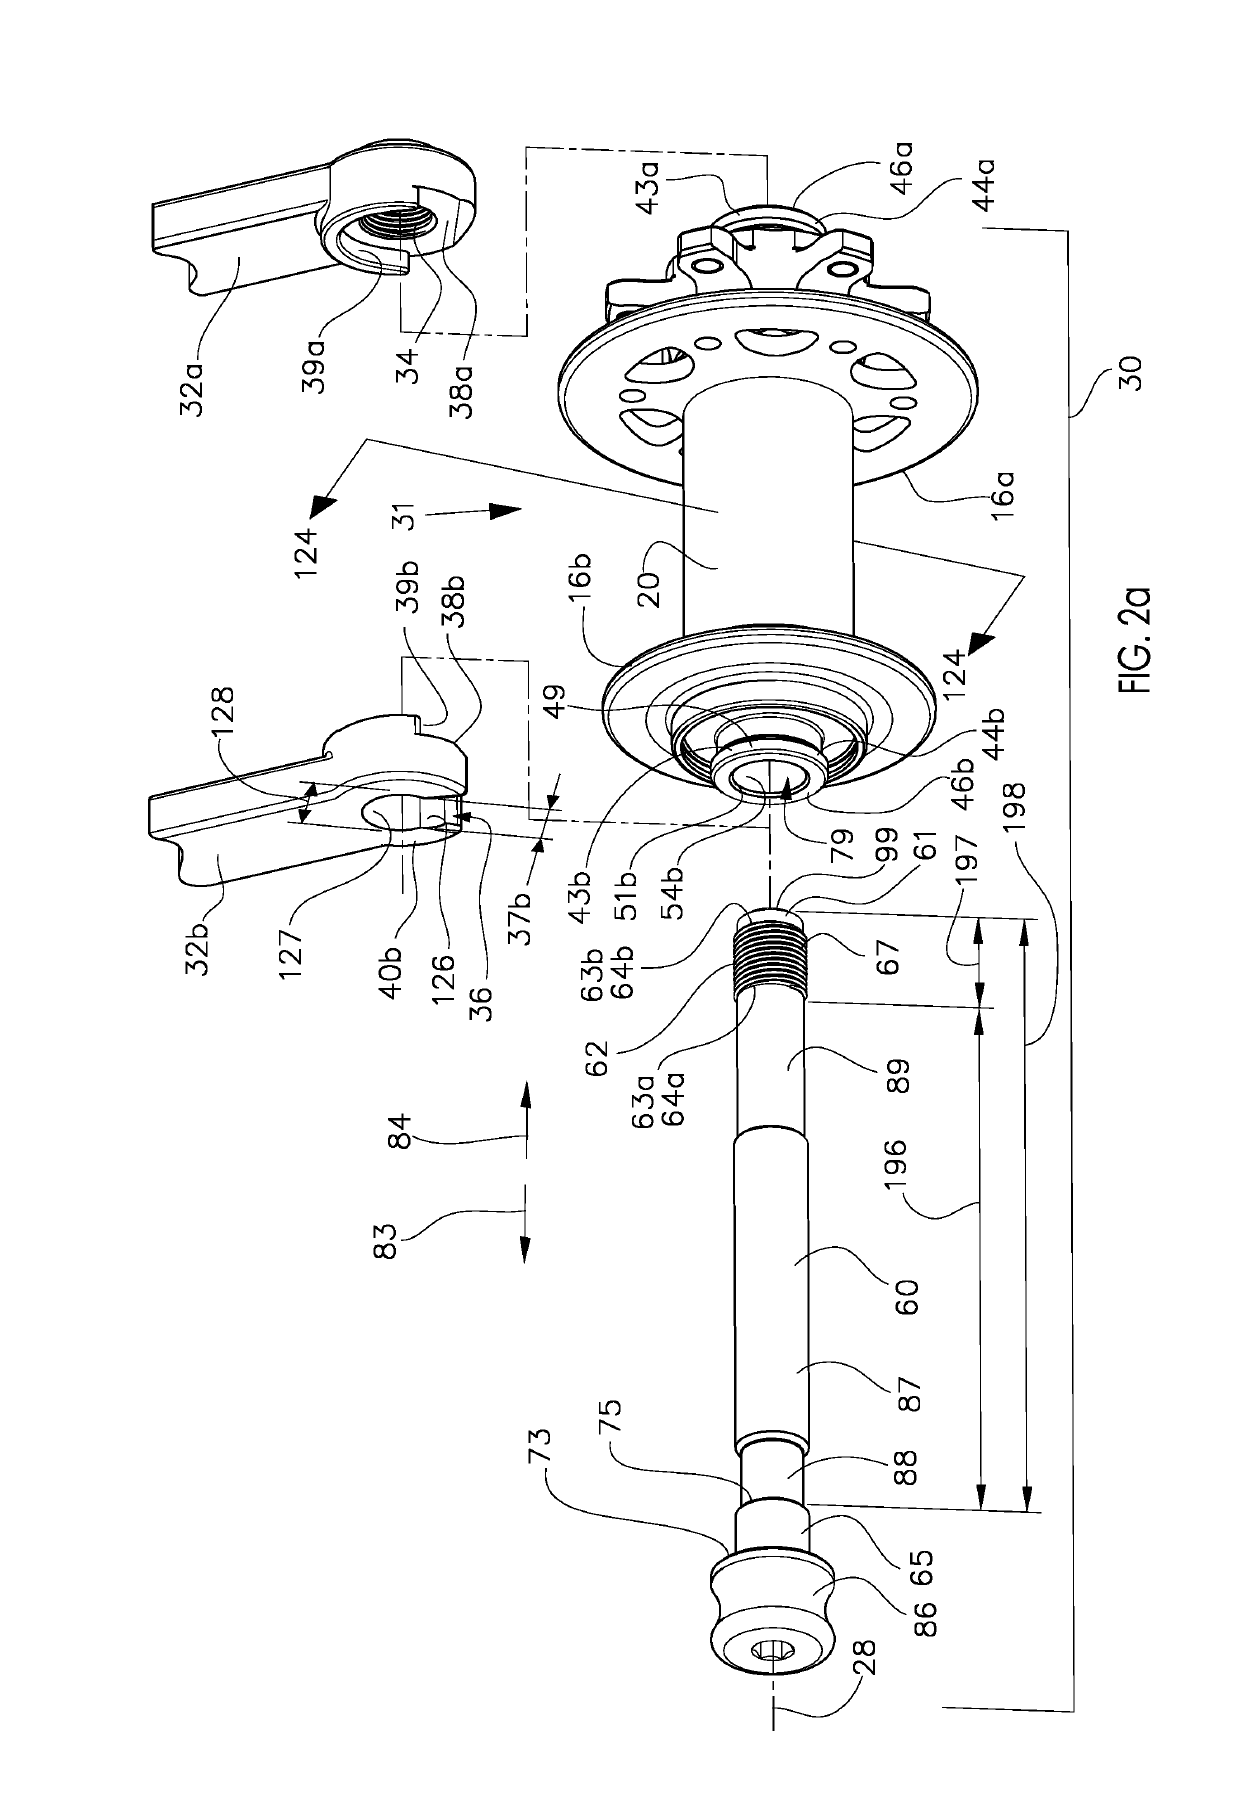 Vehicle wheel axle assembly